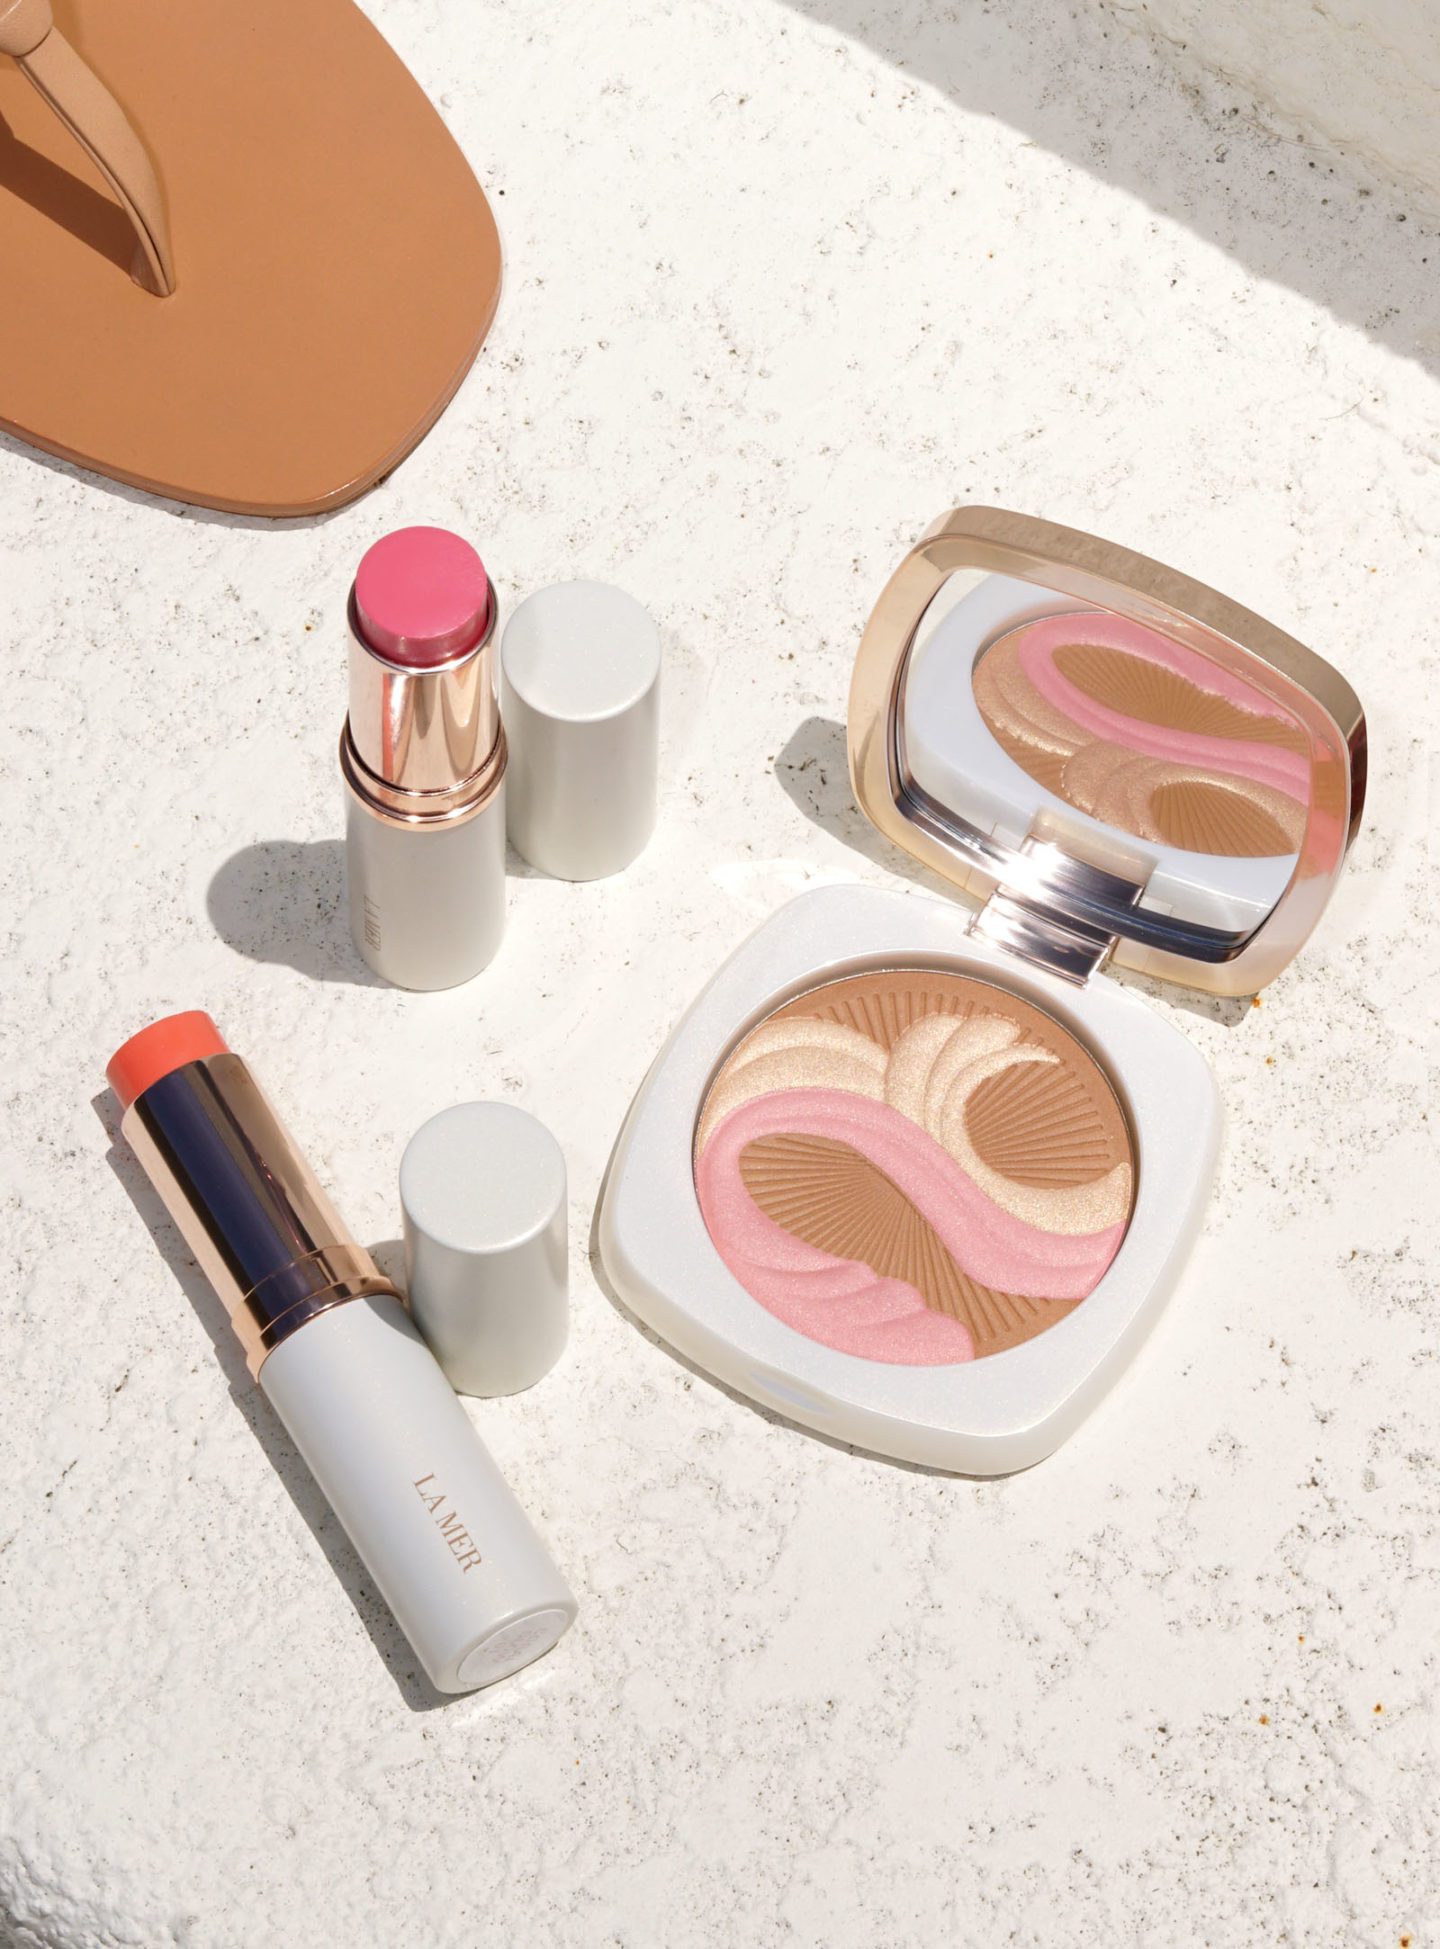 La Mer Summer 2018 Collection Review and Swatches